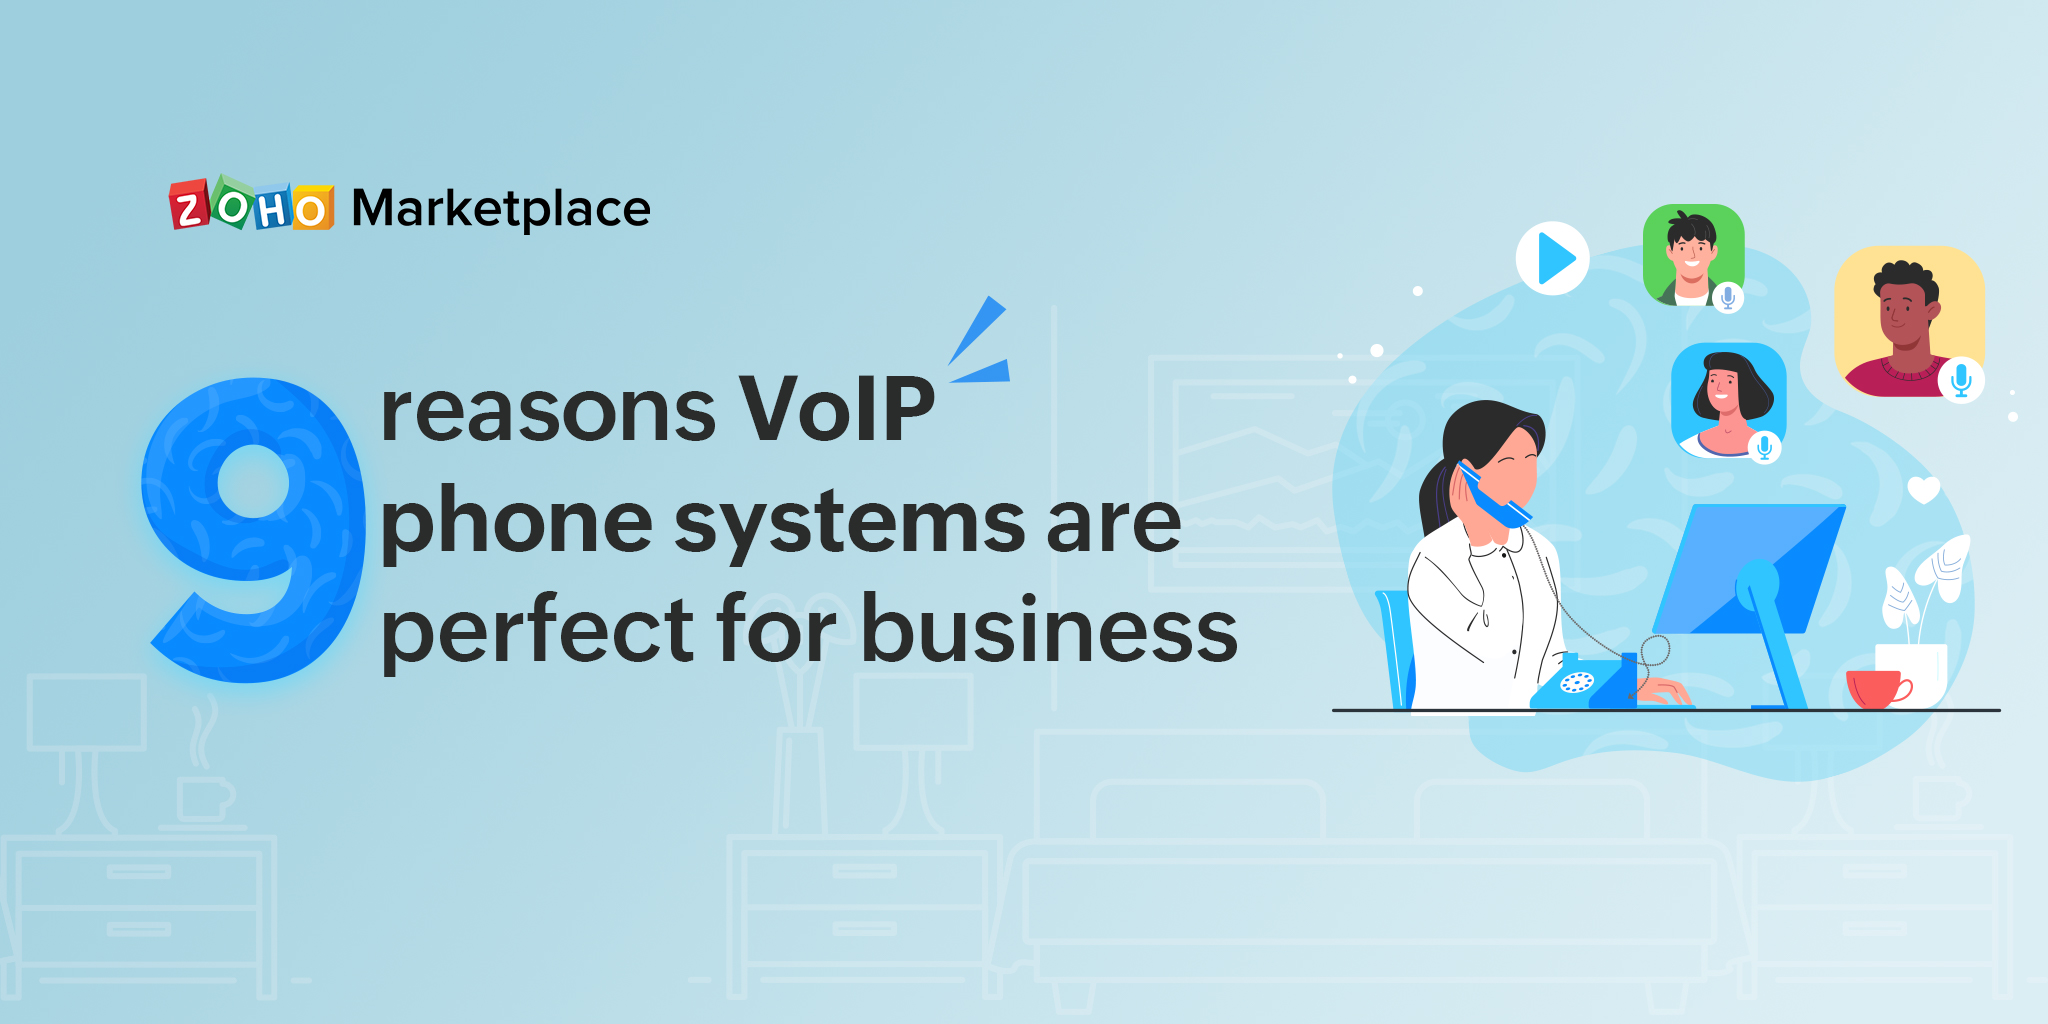 9 reasons VoIP phone systems are perfect for business